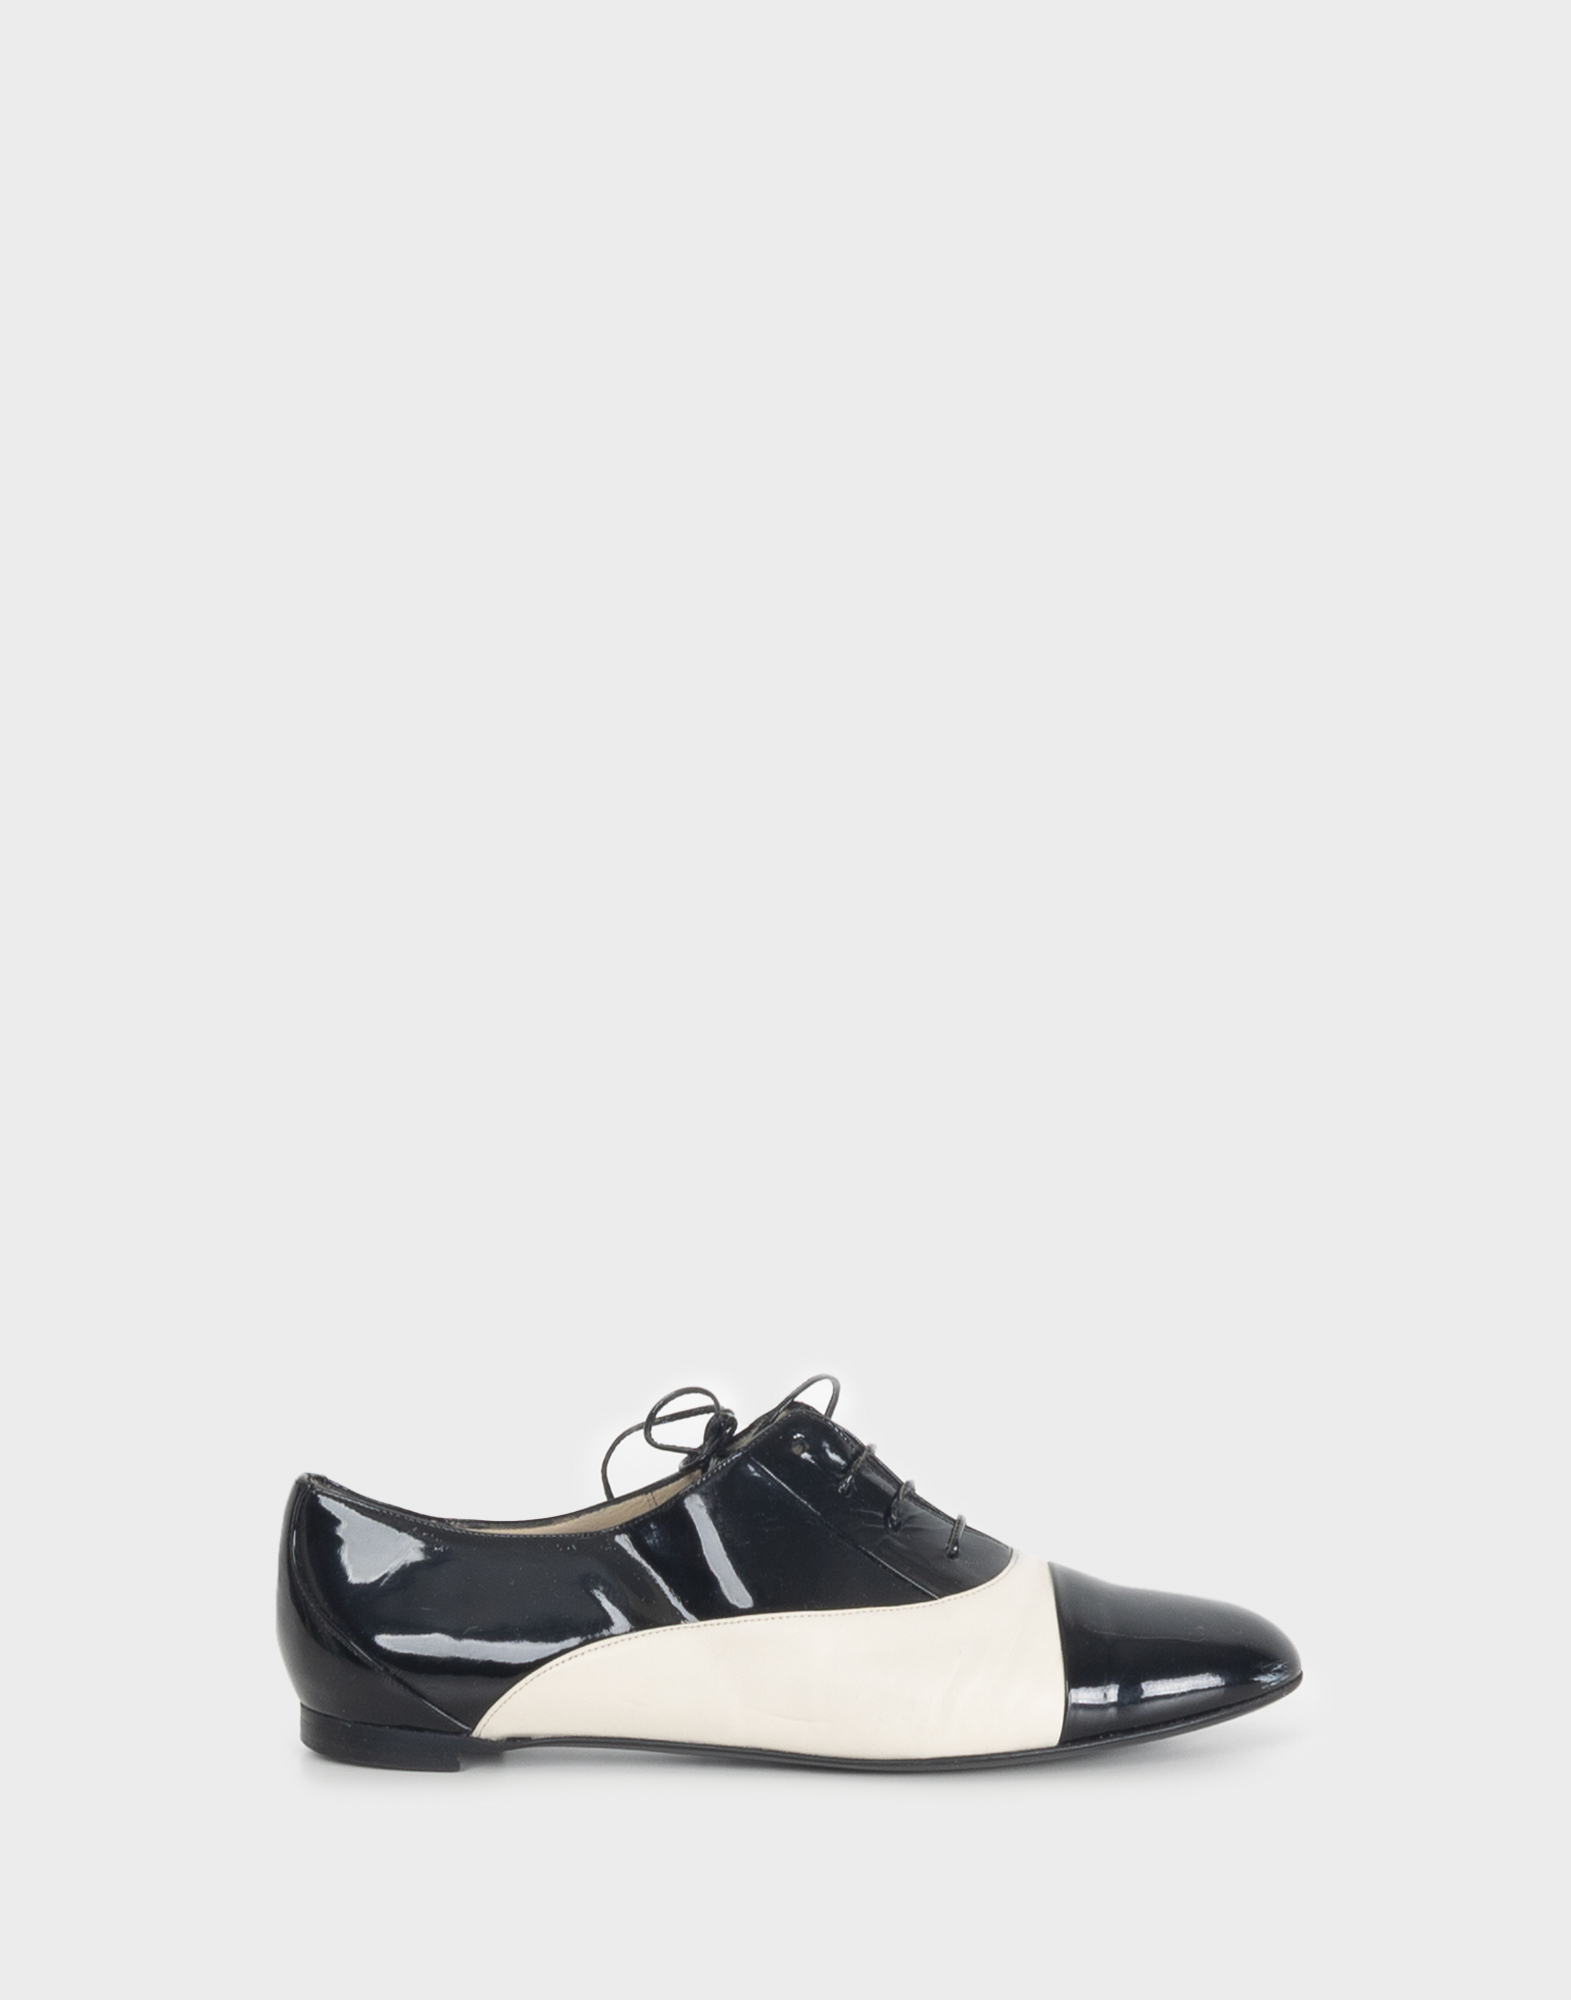 Women's black and white patent leather derby shoes with a round toe and laces.